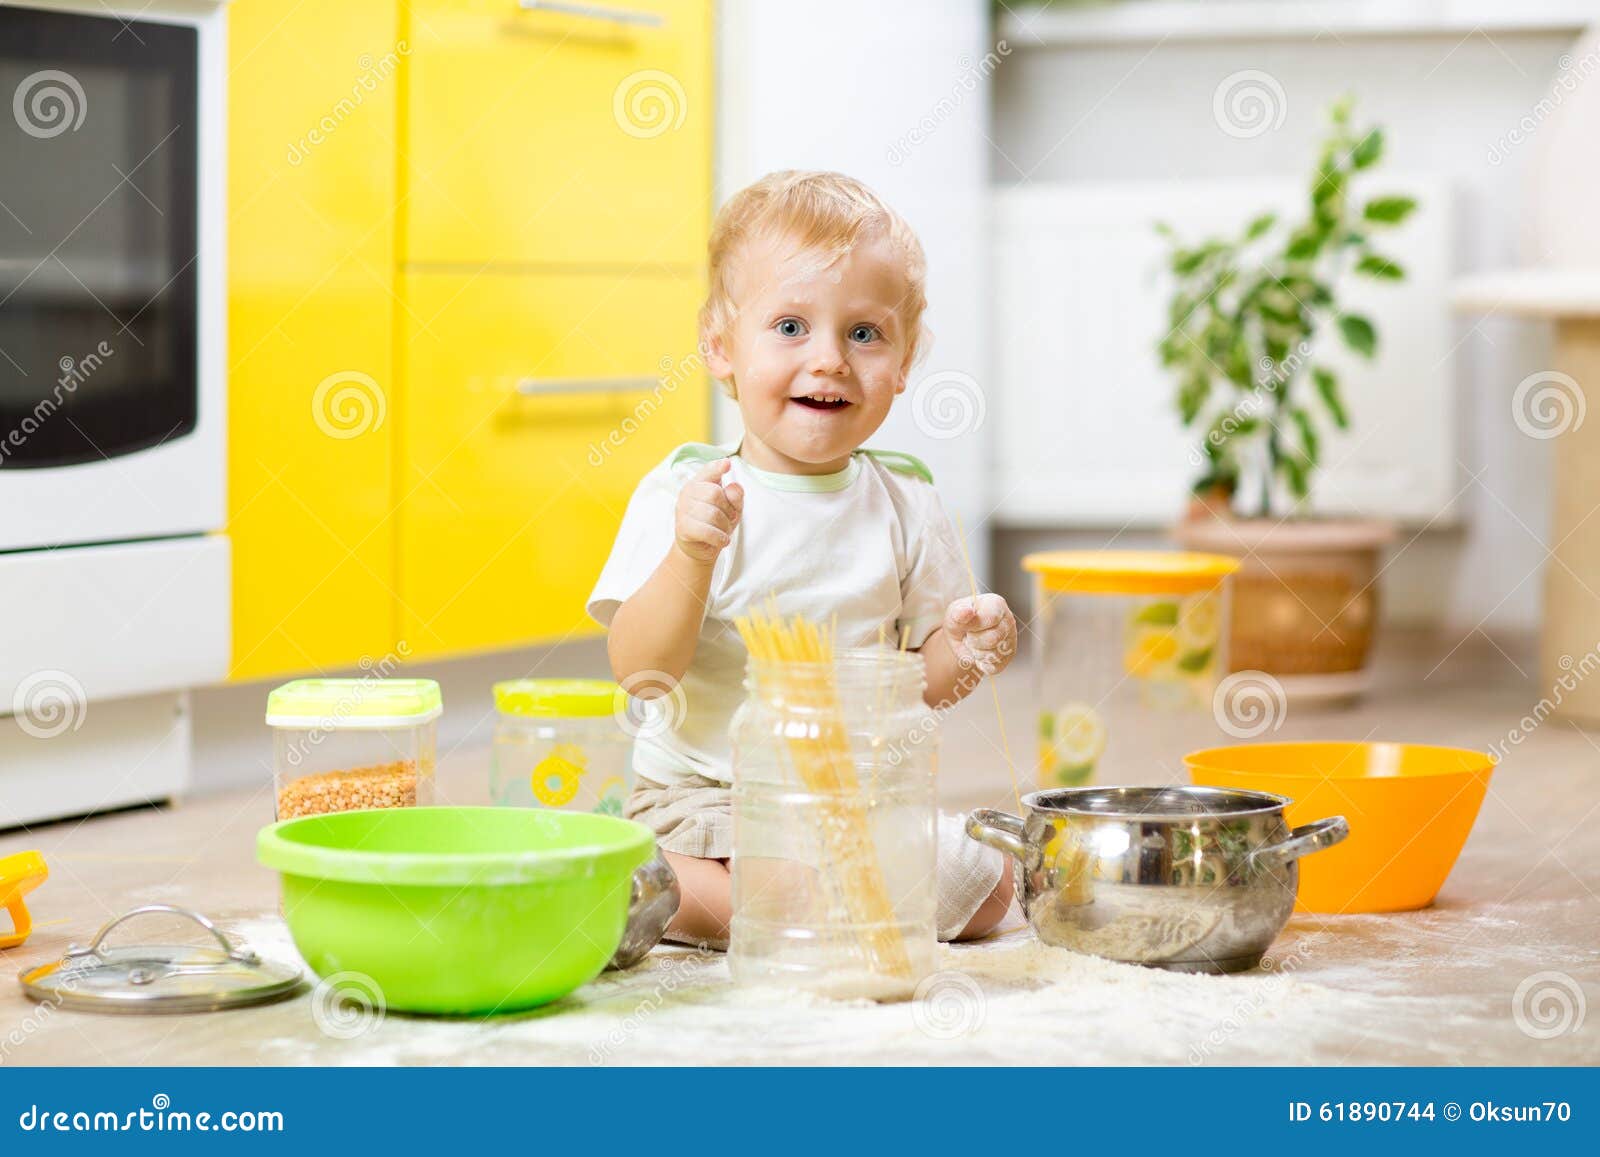 playful kid boy with face in flour surrounded kitchenware and foodstuffs